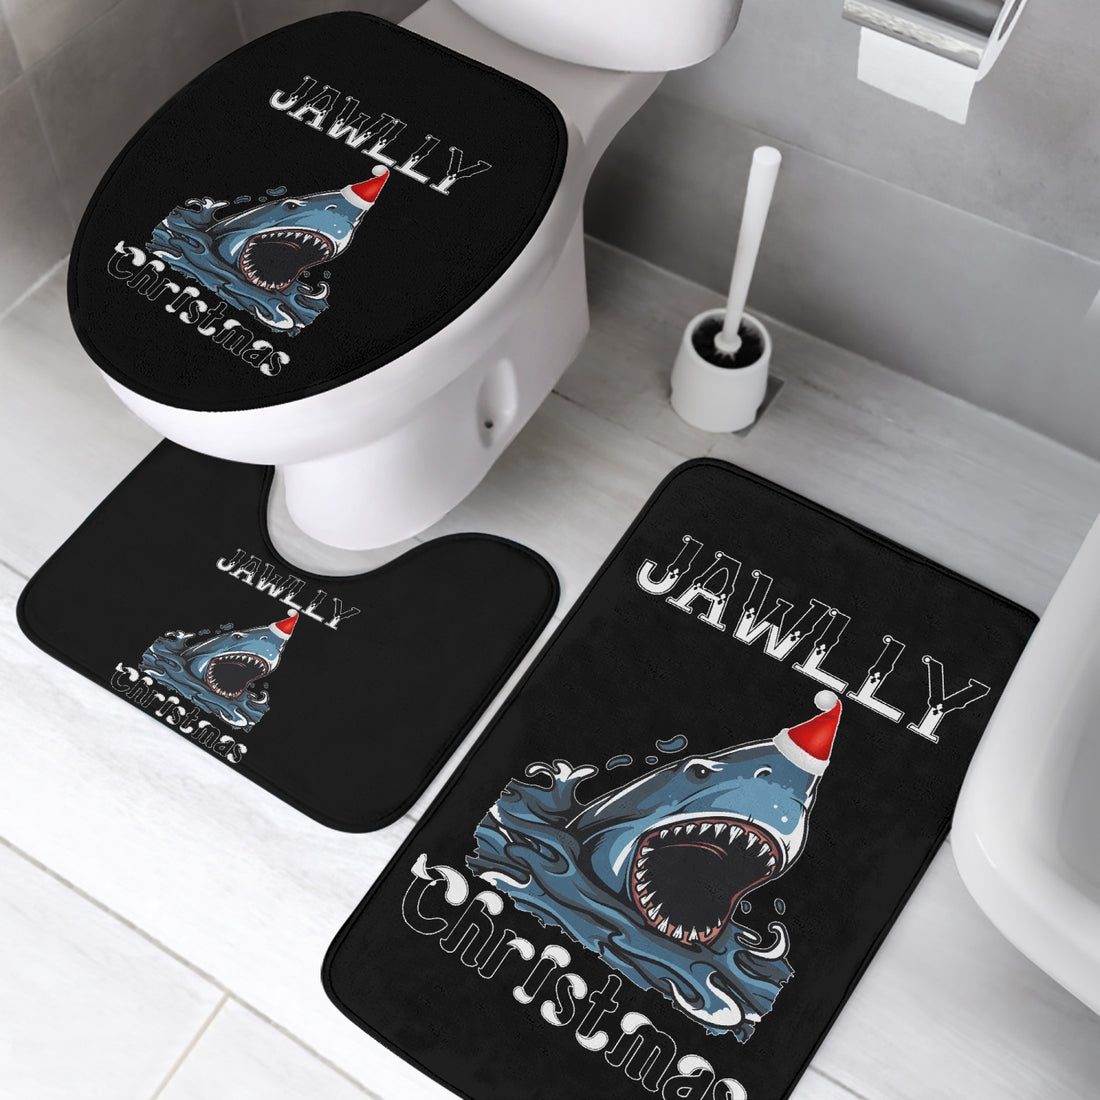 Jawlly Christmas: Stylish and Cozy Toilet Rug Sets for Festive Décor! Home-clothes-jewelry